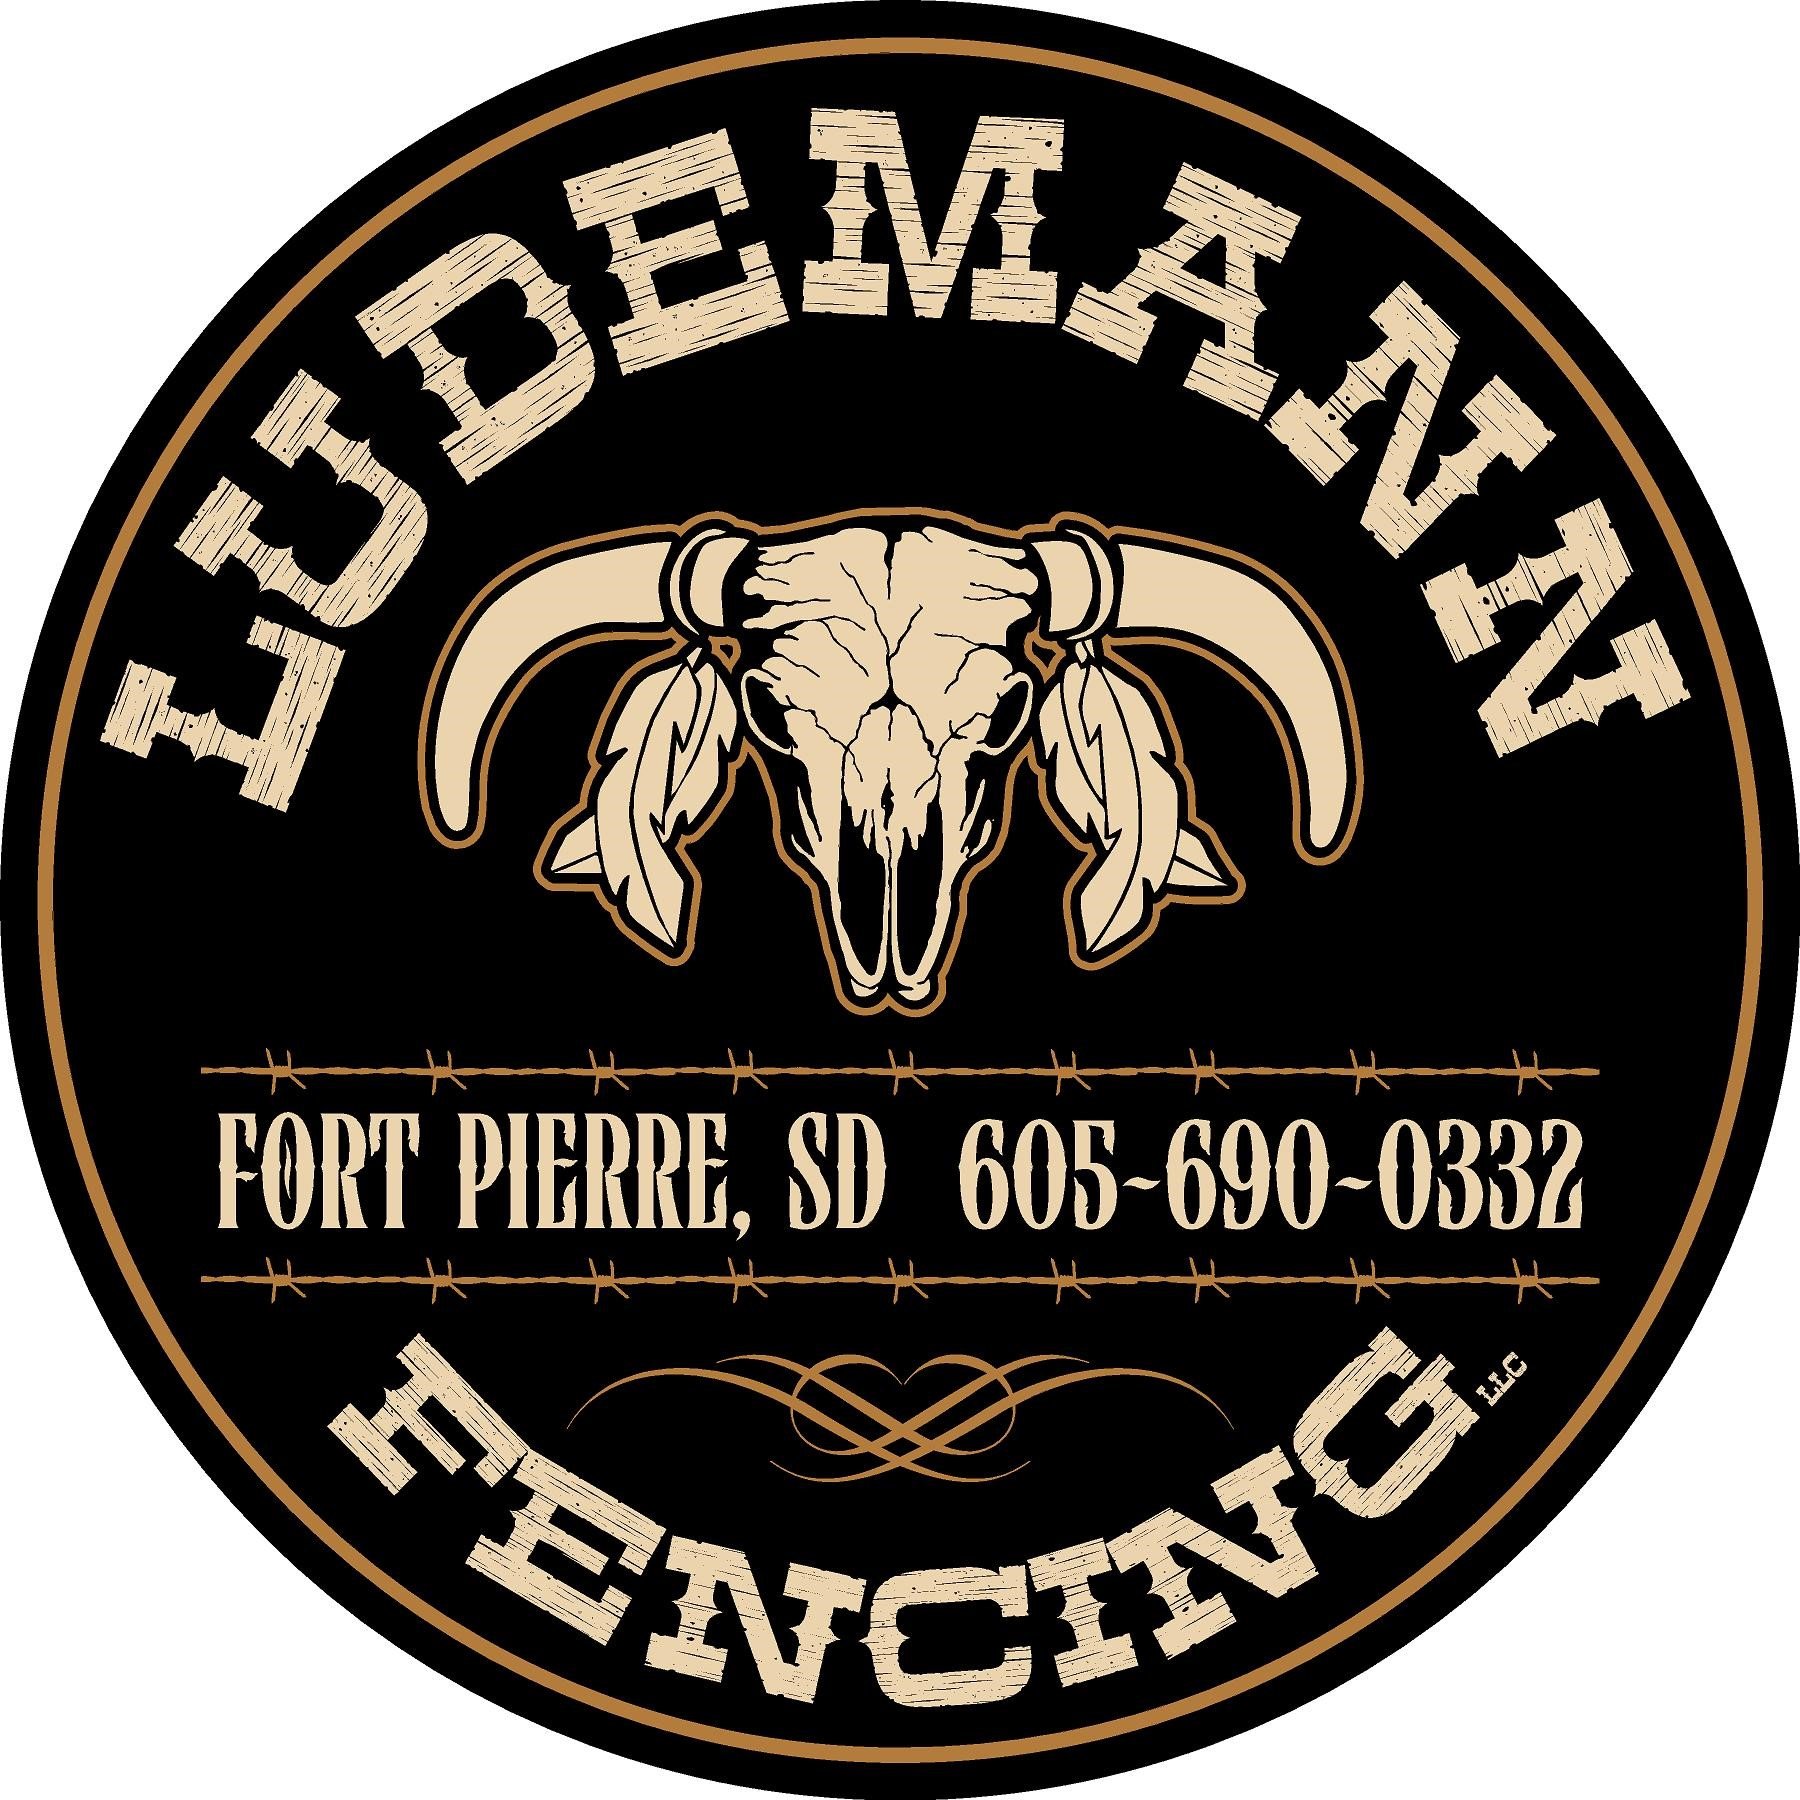 Chain Link Fence Fort Pierre, SD Ludemann Fencing